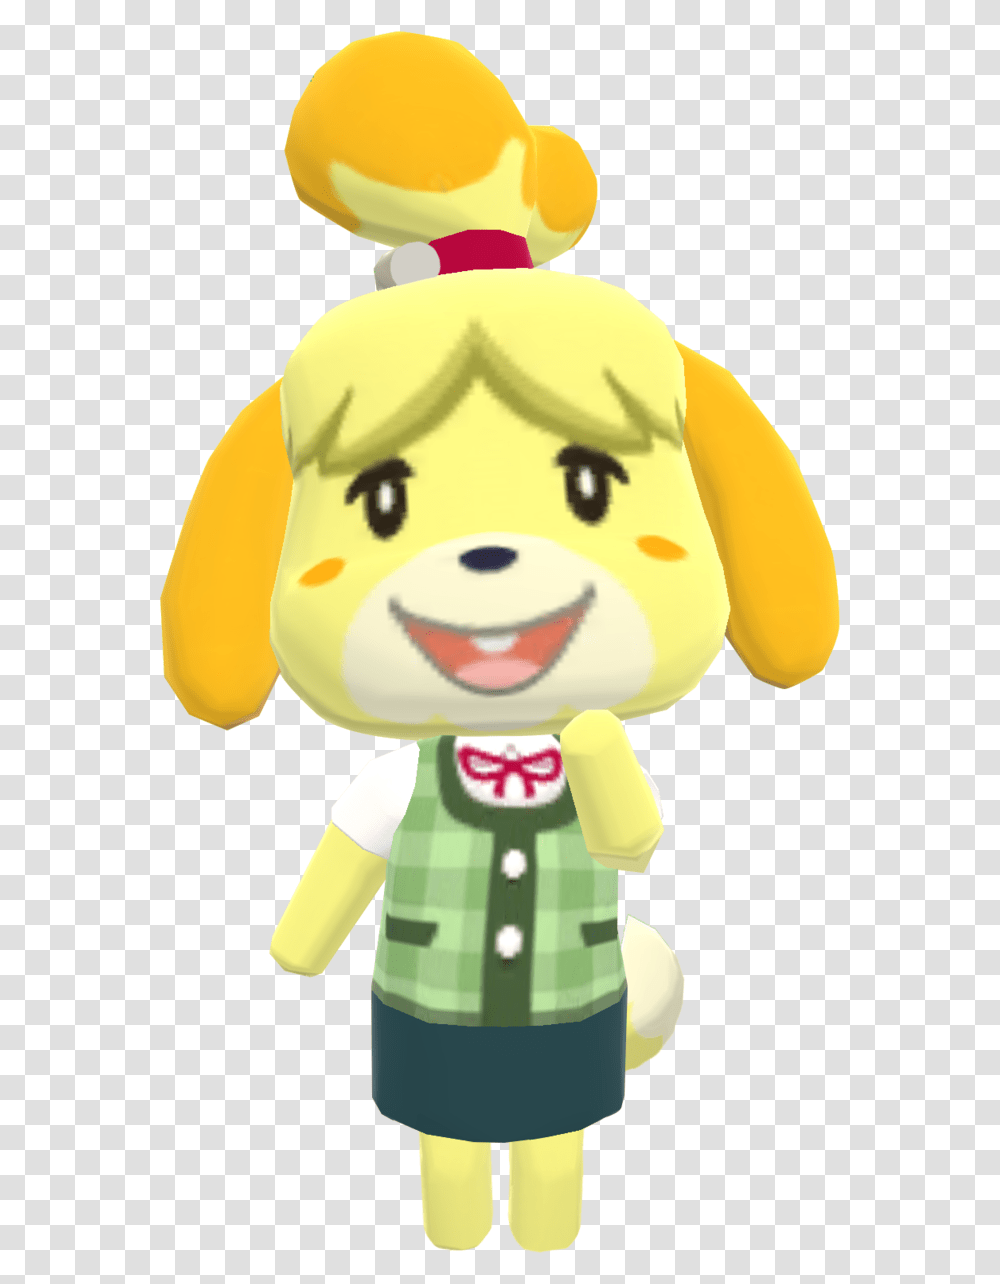 Animal Crossing Isabelle Horny, Toy, Plush, Doll, Figurine Transparent Png